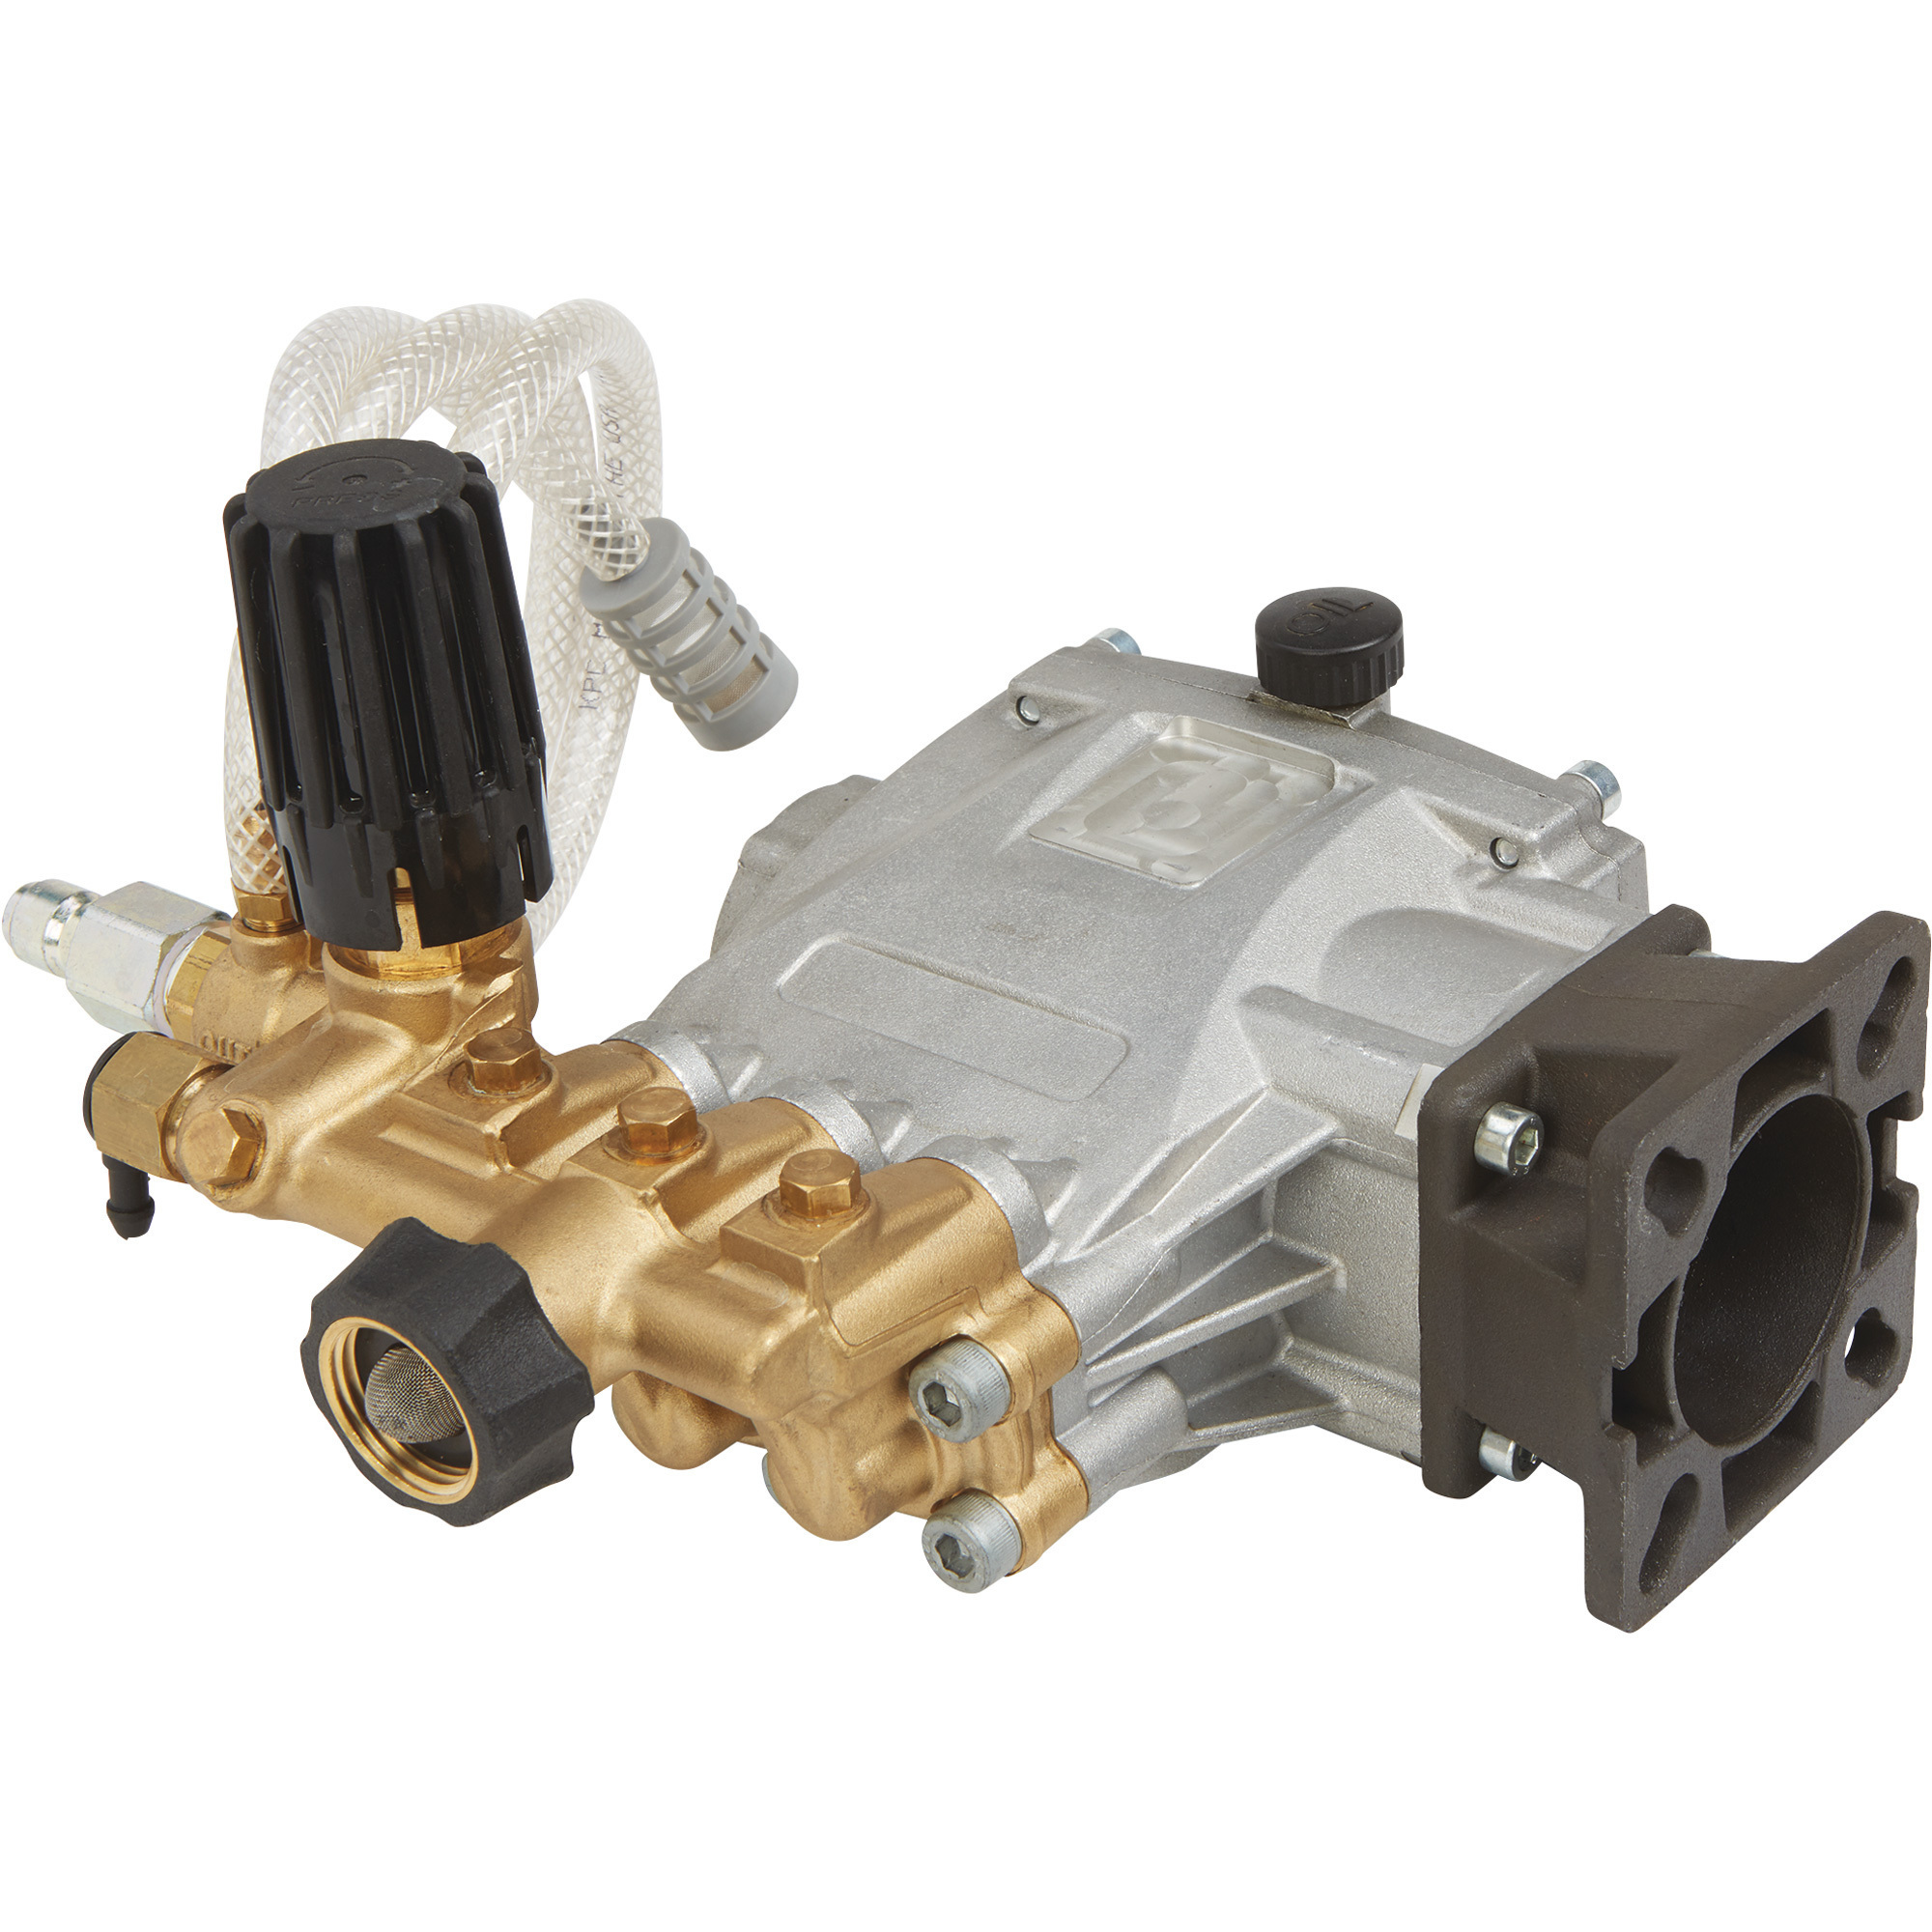 Comet Pressure Washer Pump Assembly, 3100 PSI, 2.5 GPM, Direct Drive, Gas, Model DWD-K2530